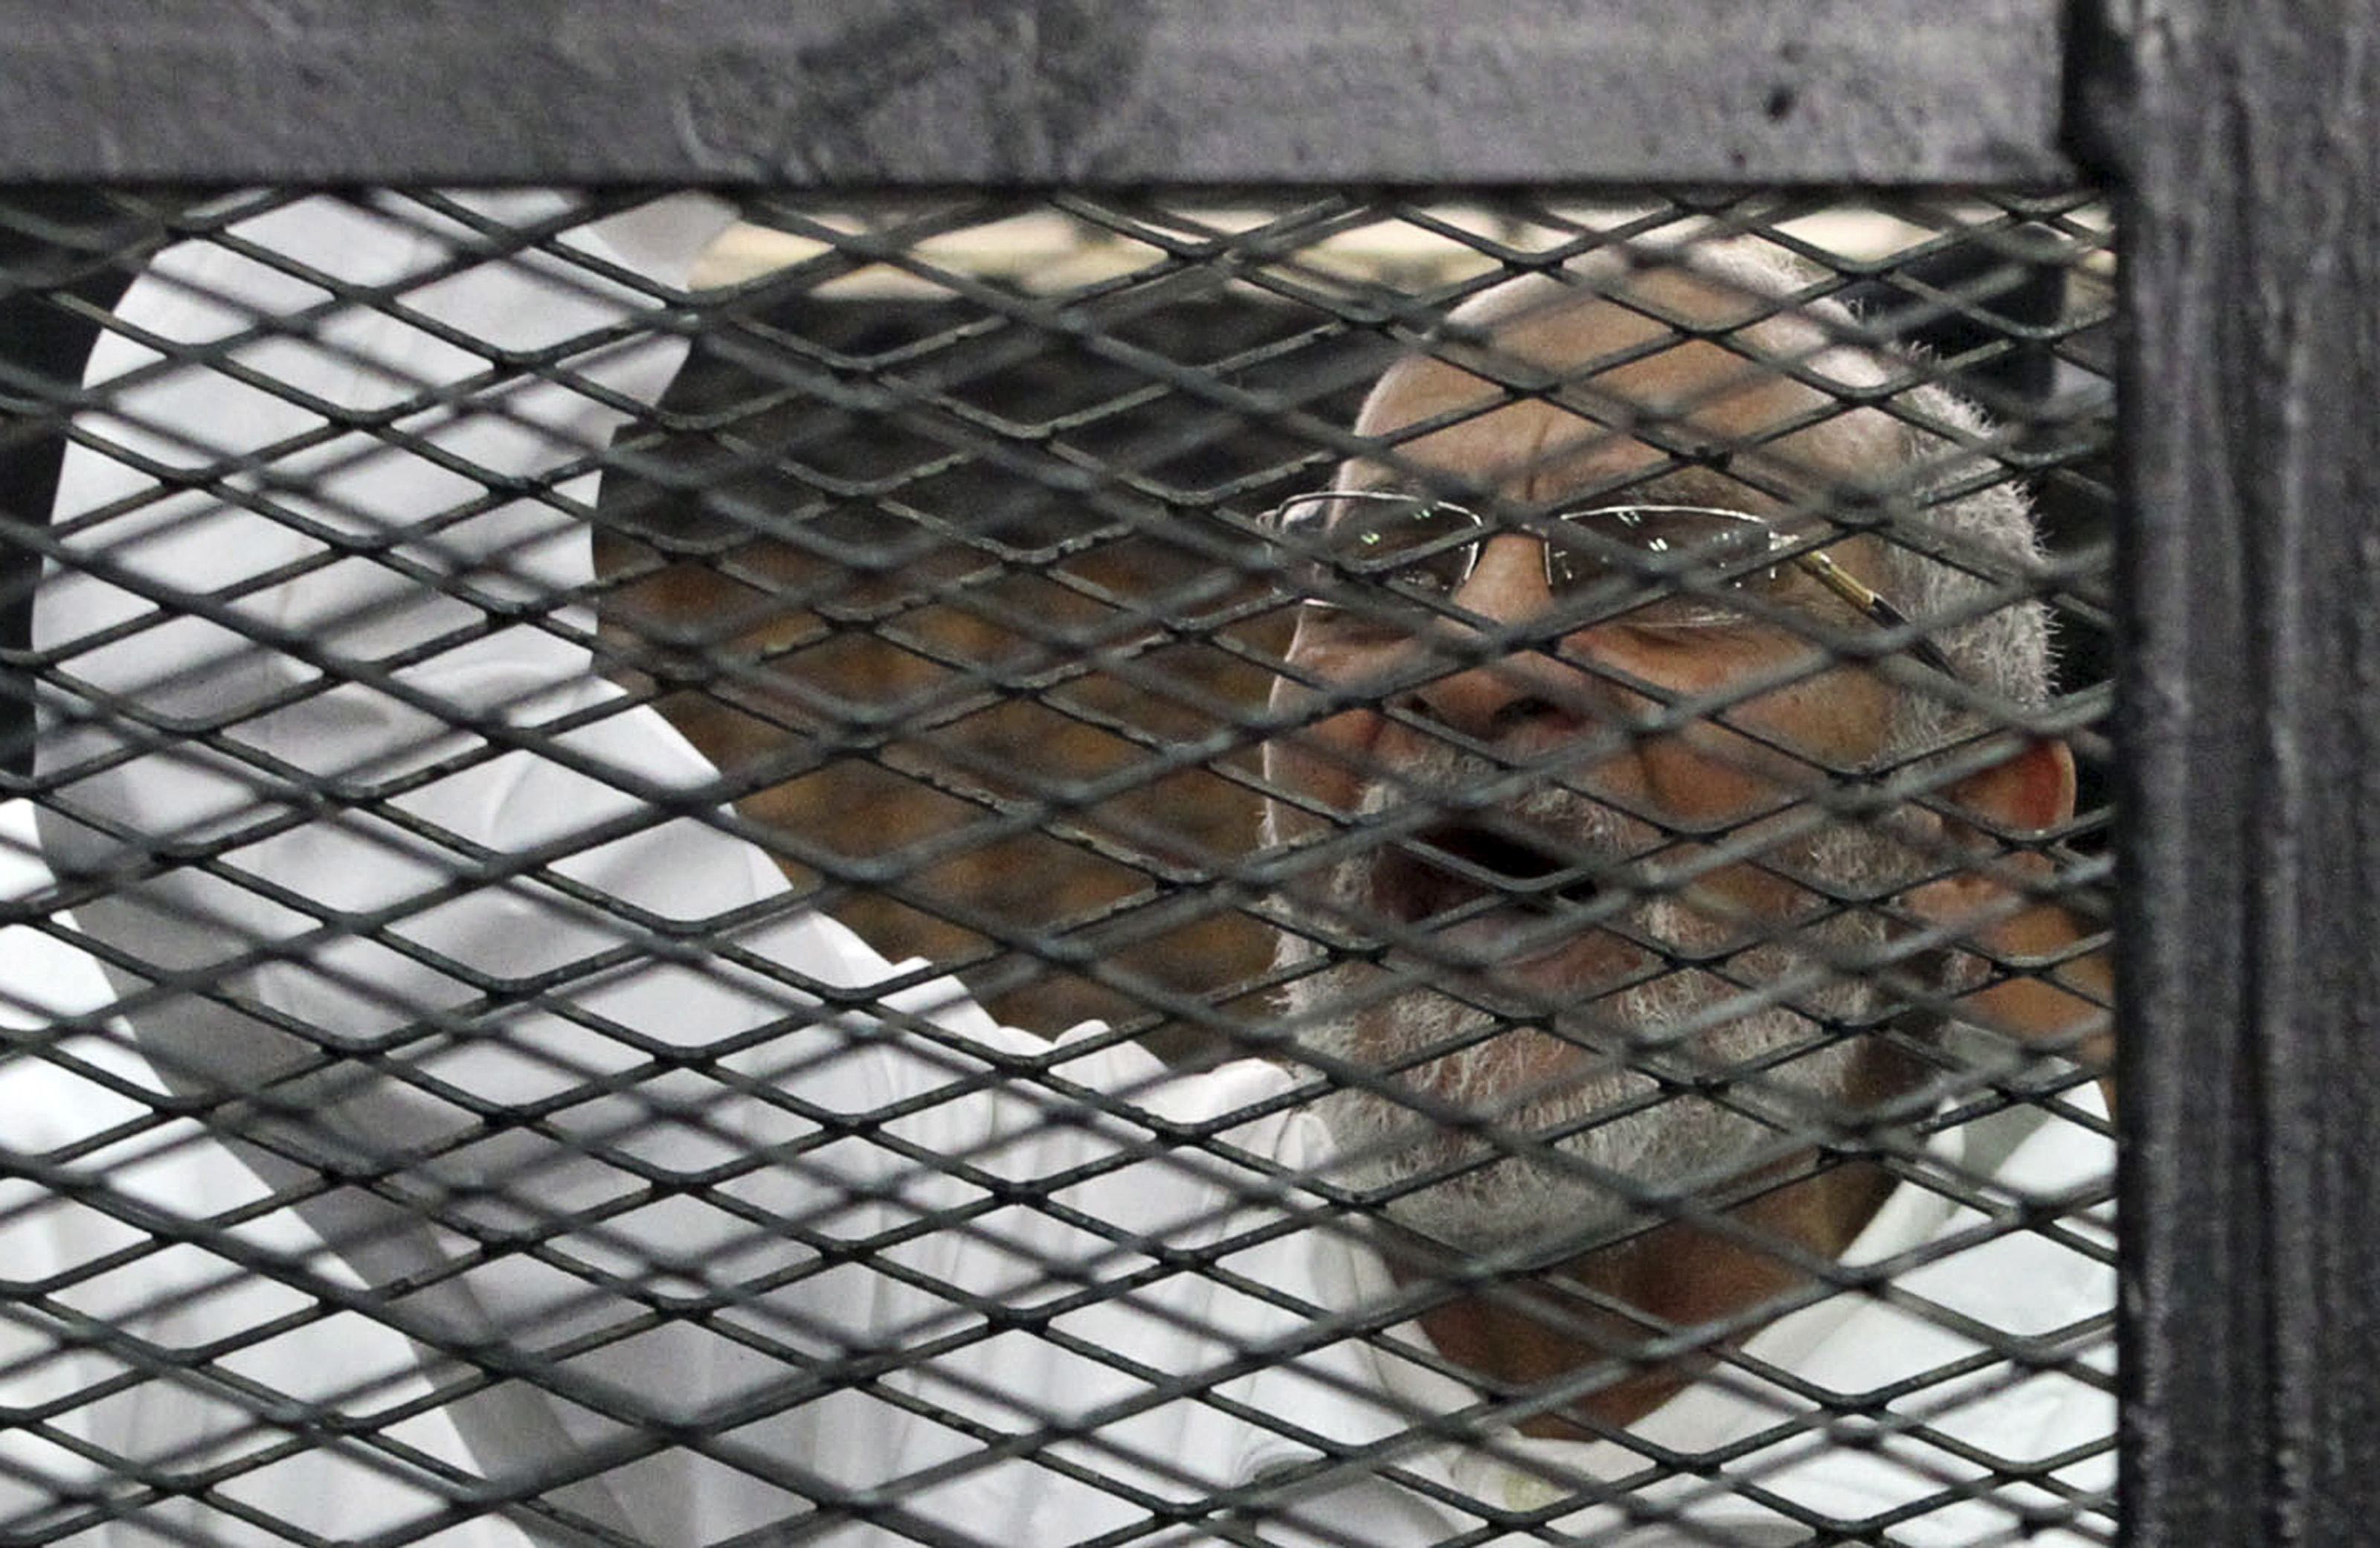 Badie and other Brotherhood leaders sentenced to life in prison over violence